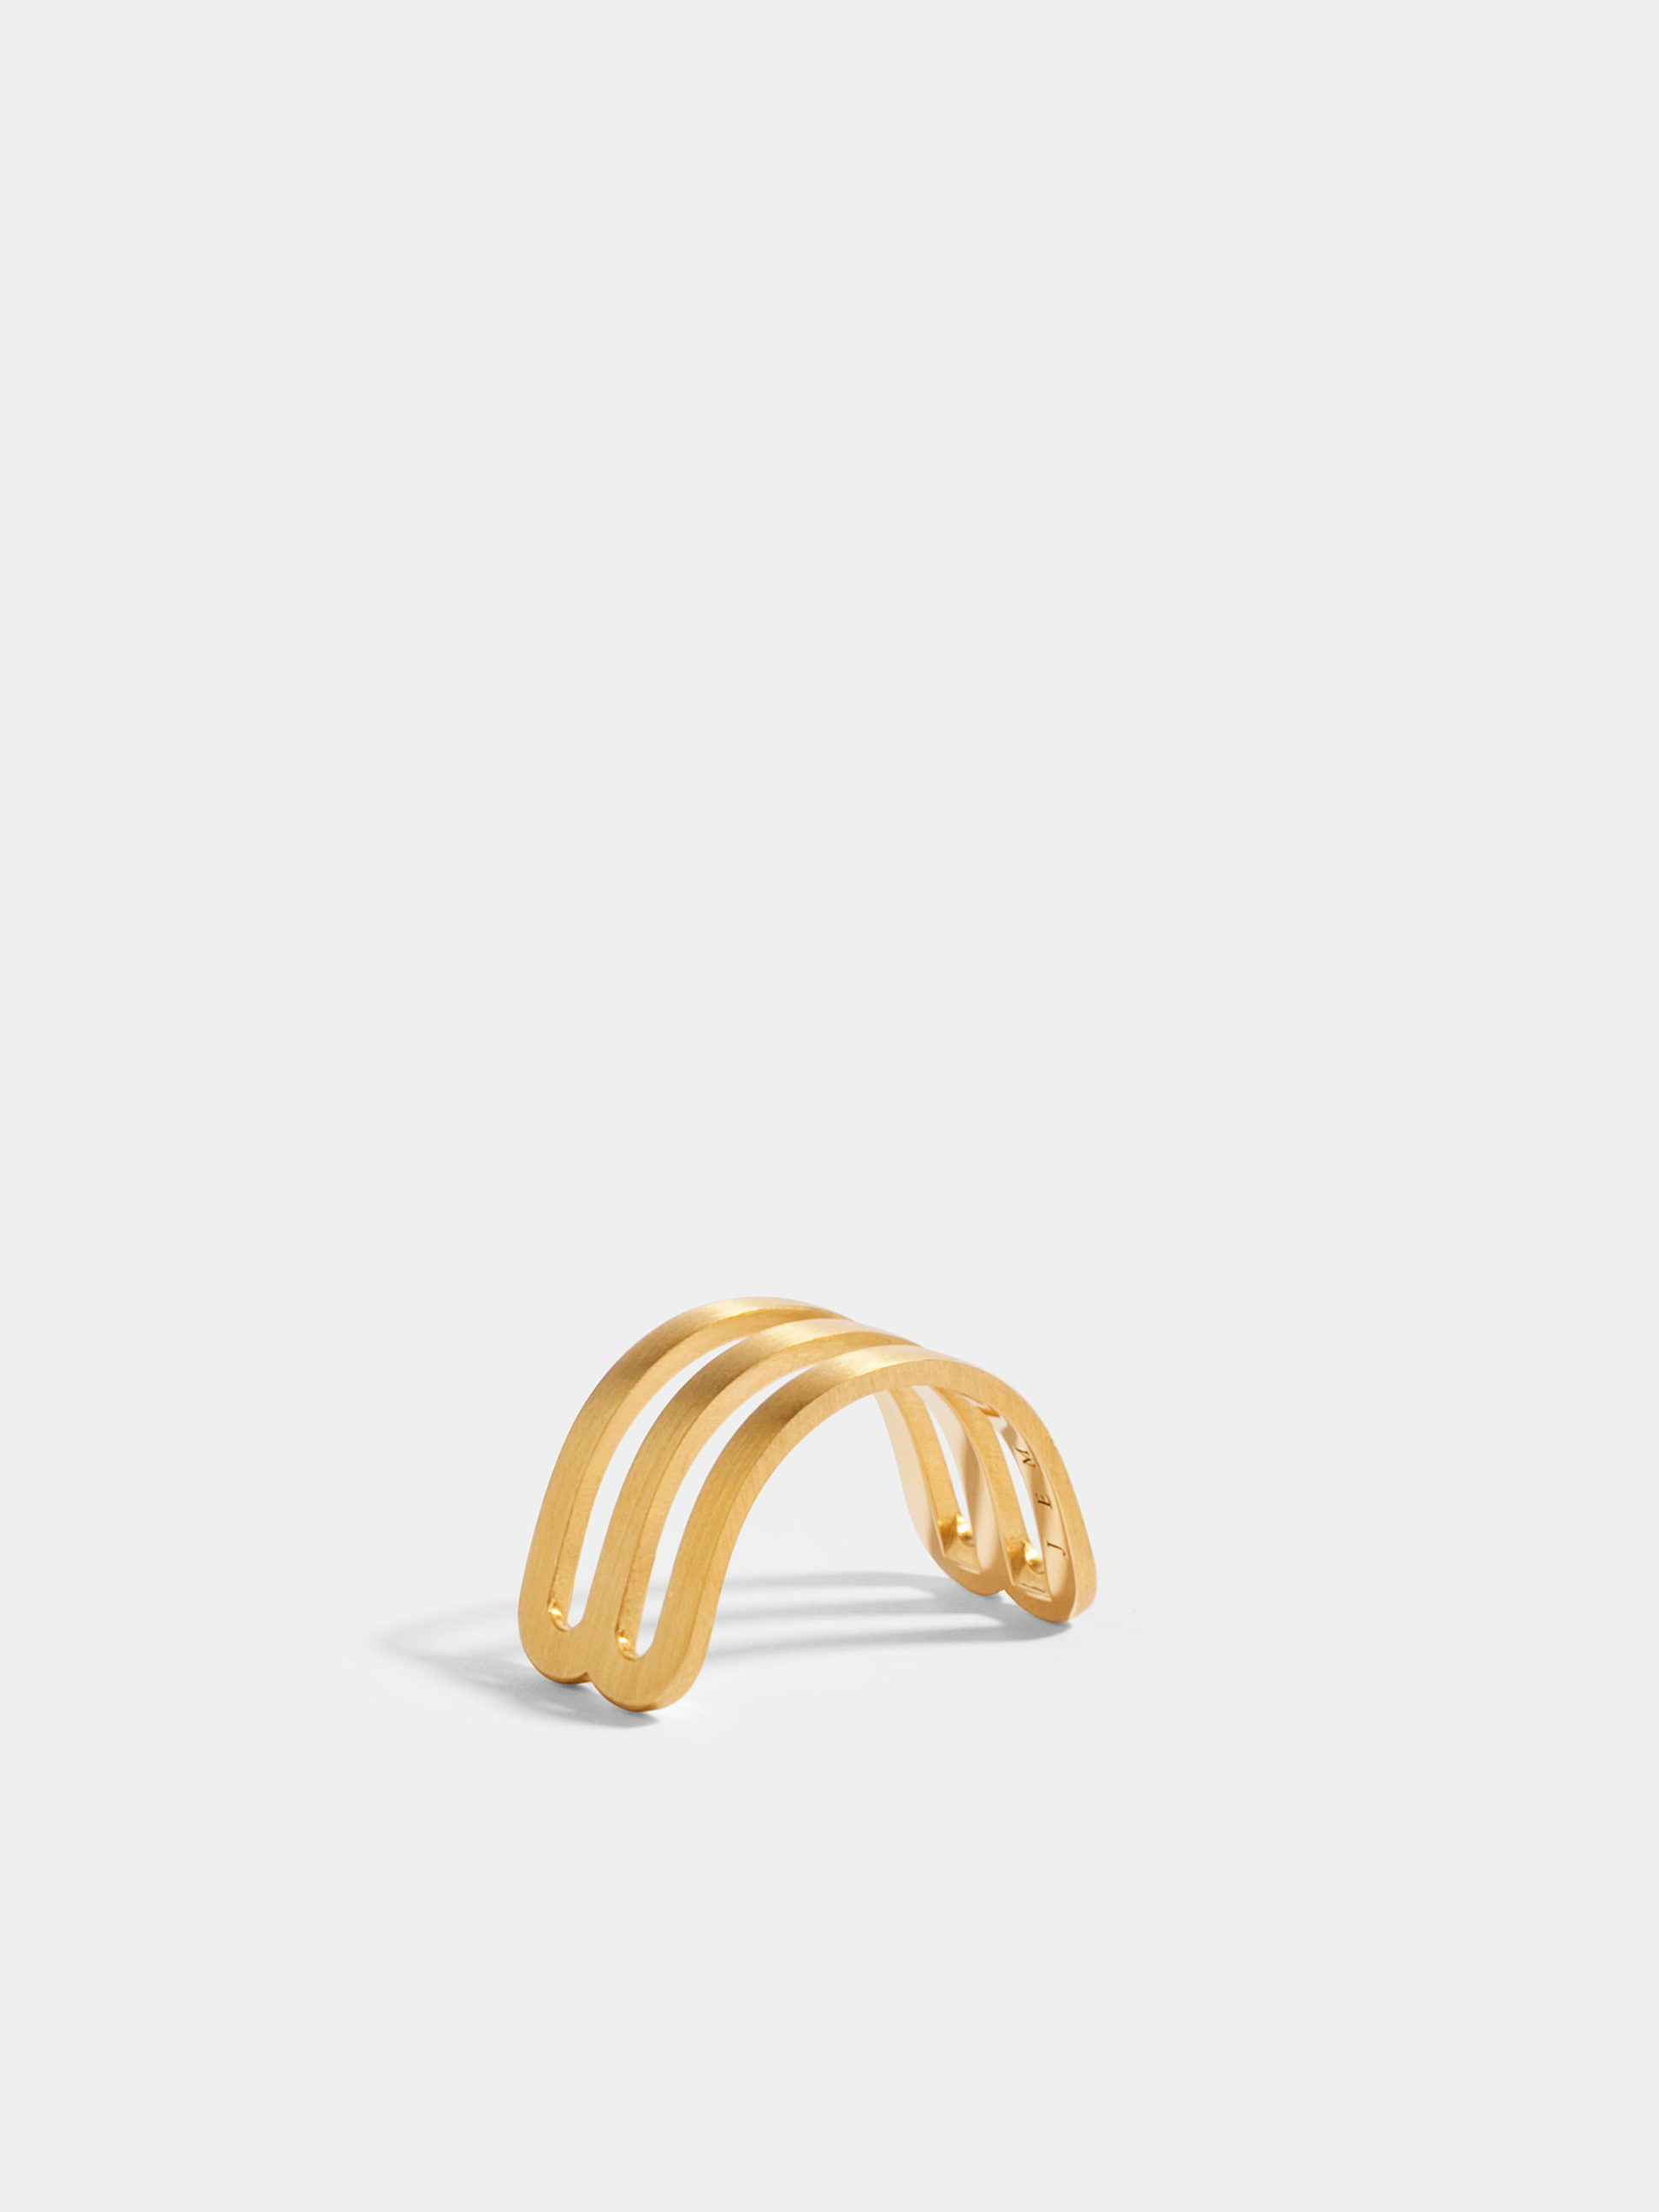 Étreintes double half-ring in 18k Fairmined ethical yellow gold, with brushed finish.